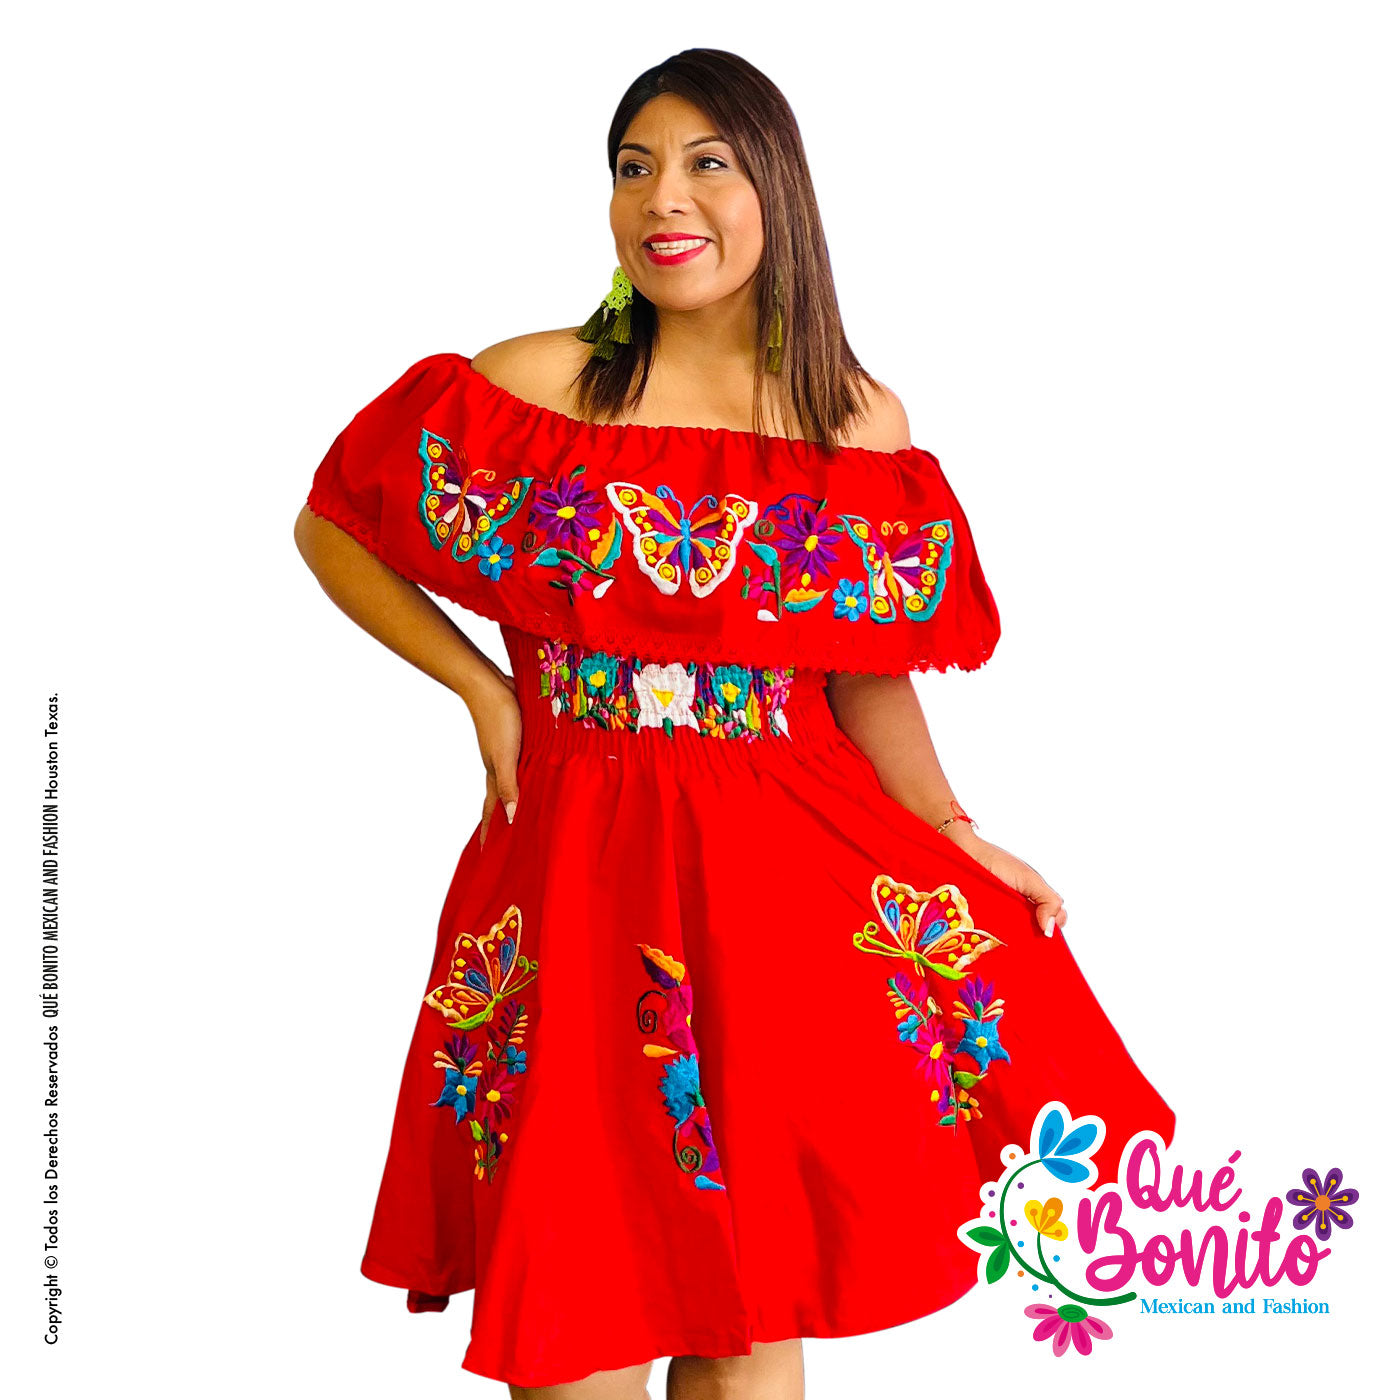 Butterfly Red Dress Que Bonito Mexican and Fashion